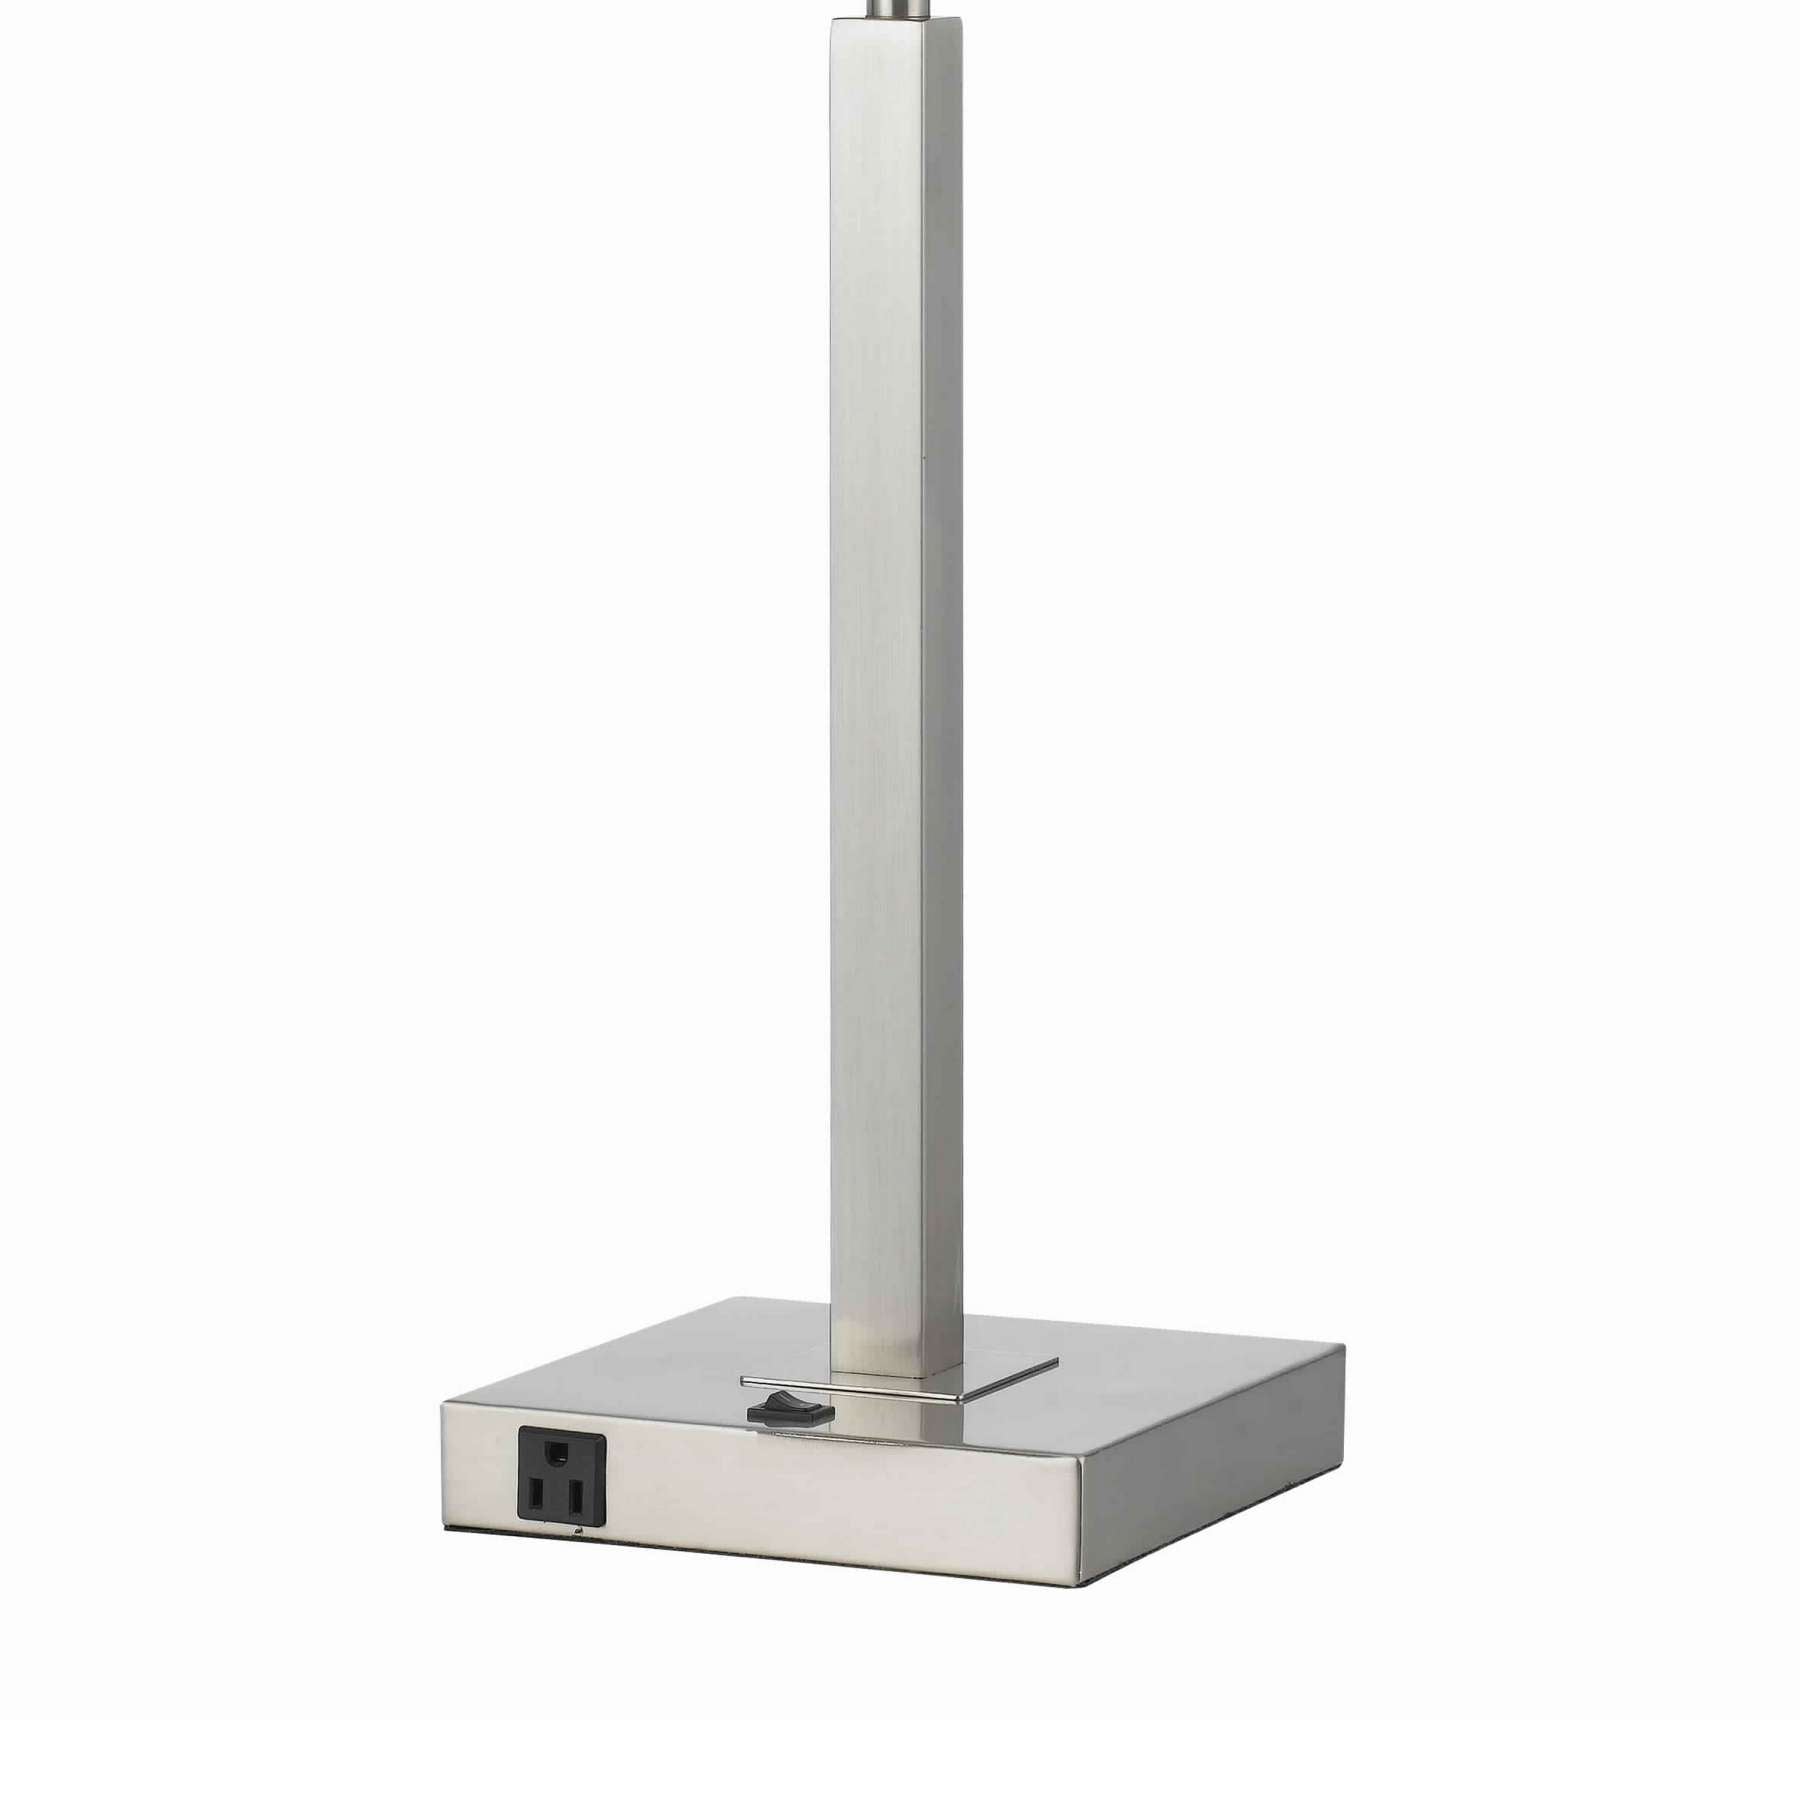 Benzara Rectangular Metal Table Lamp With Tubular Base And 2 Power Outlet, White By Benzara Table Lamps BM224691